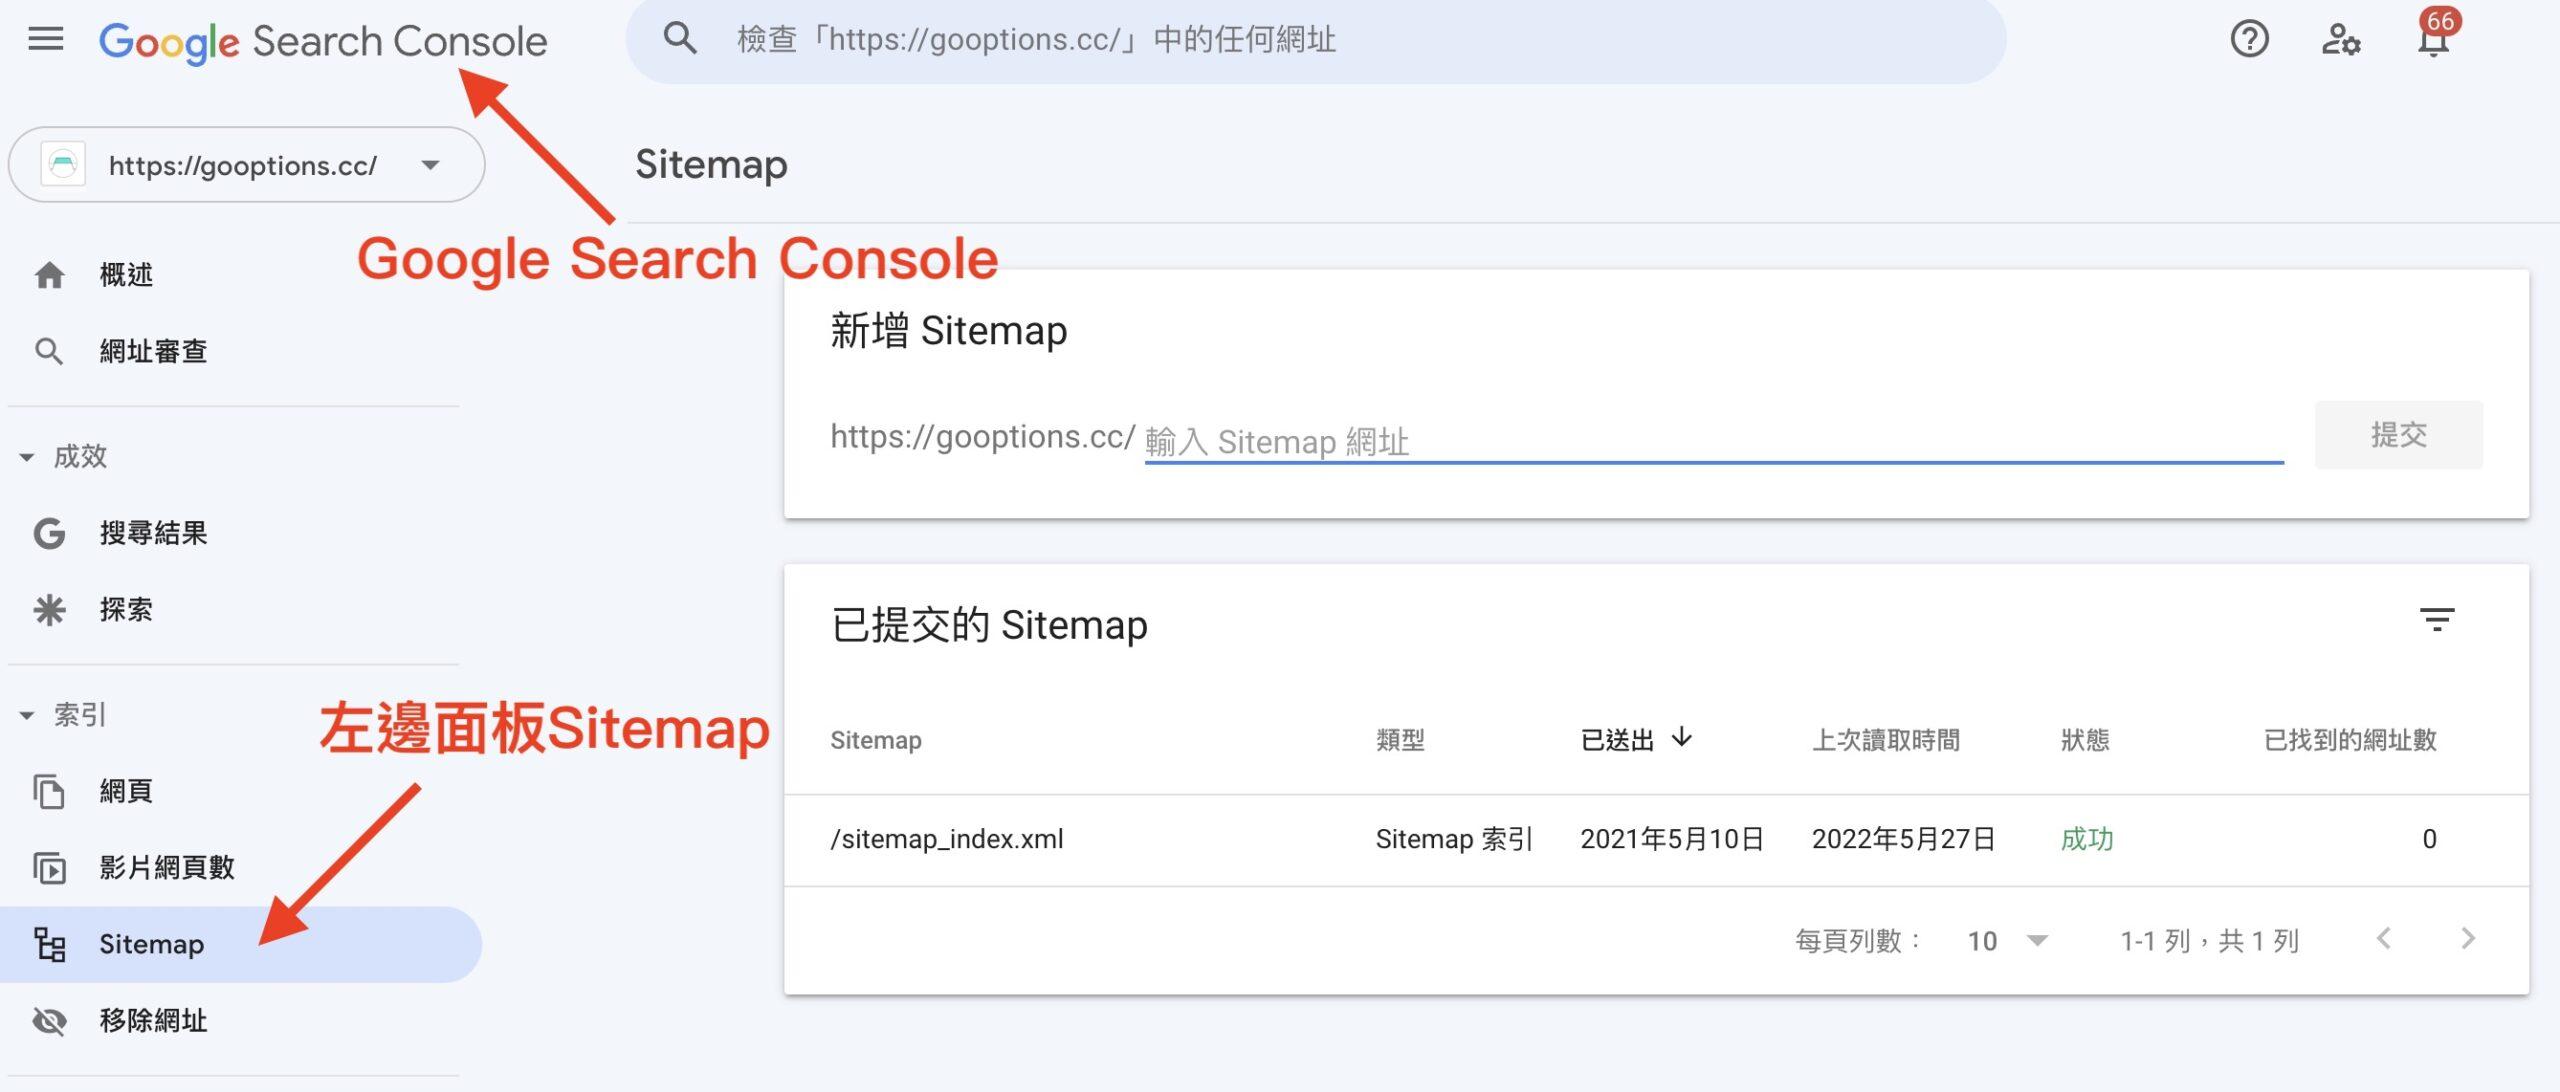 google search console sitemap 面板